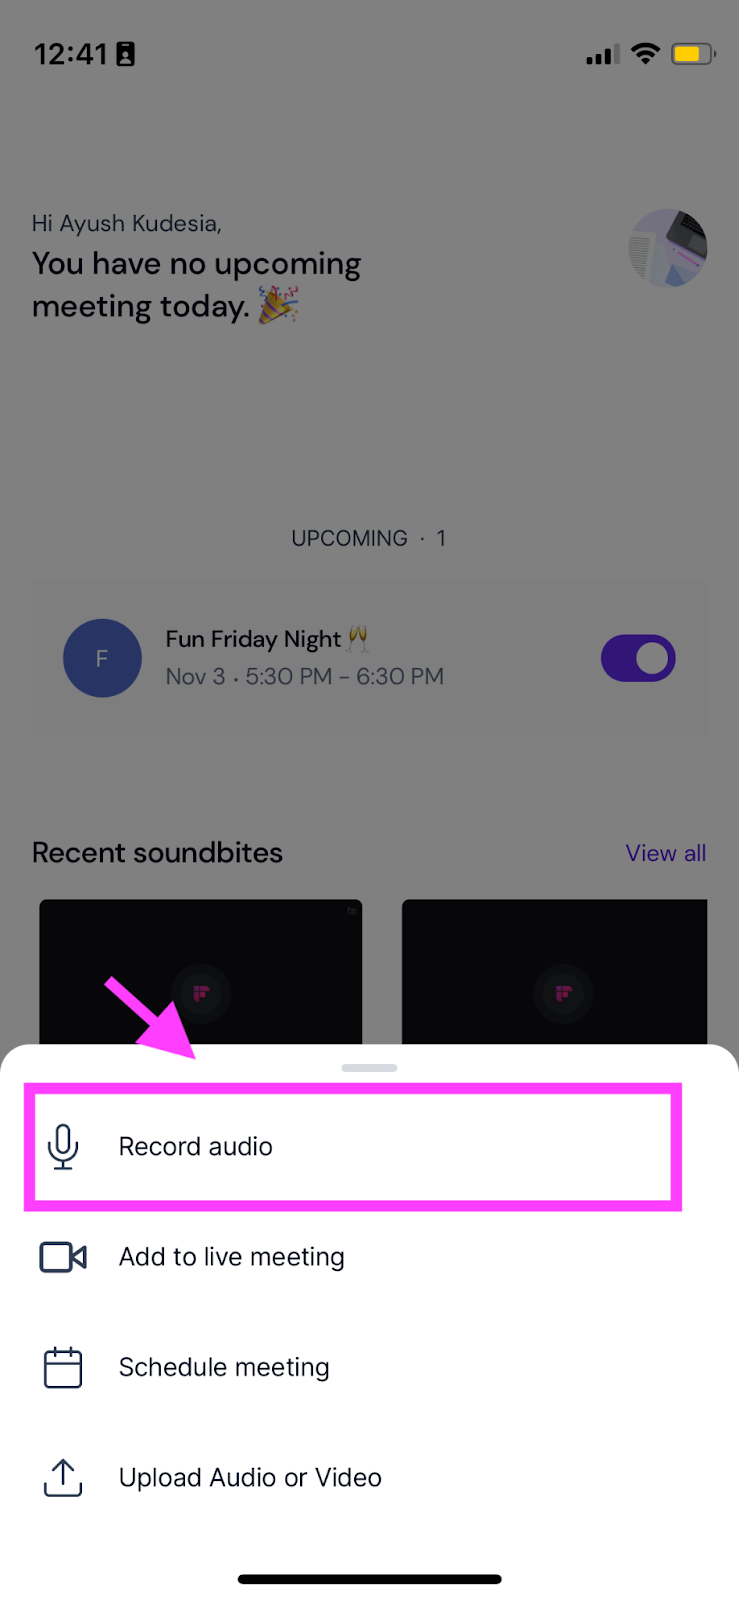 How to record a voice note on iPhone - Record audio in Fireflies mobile app